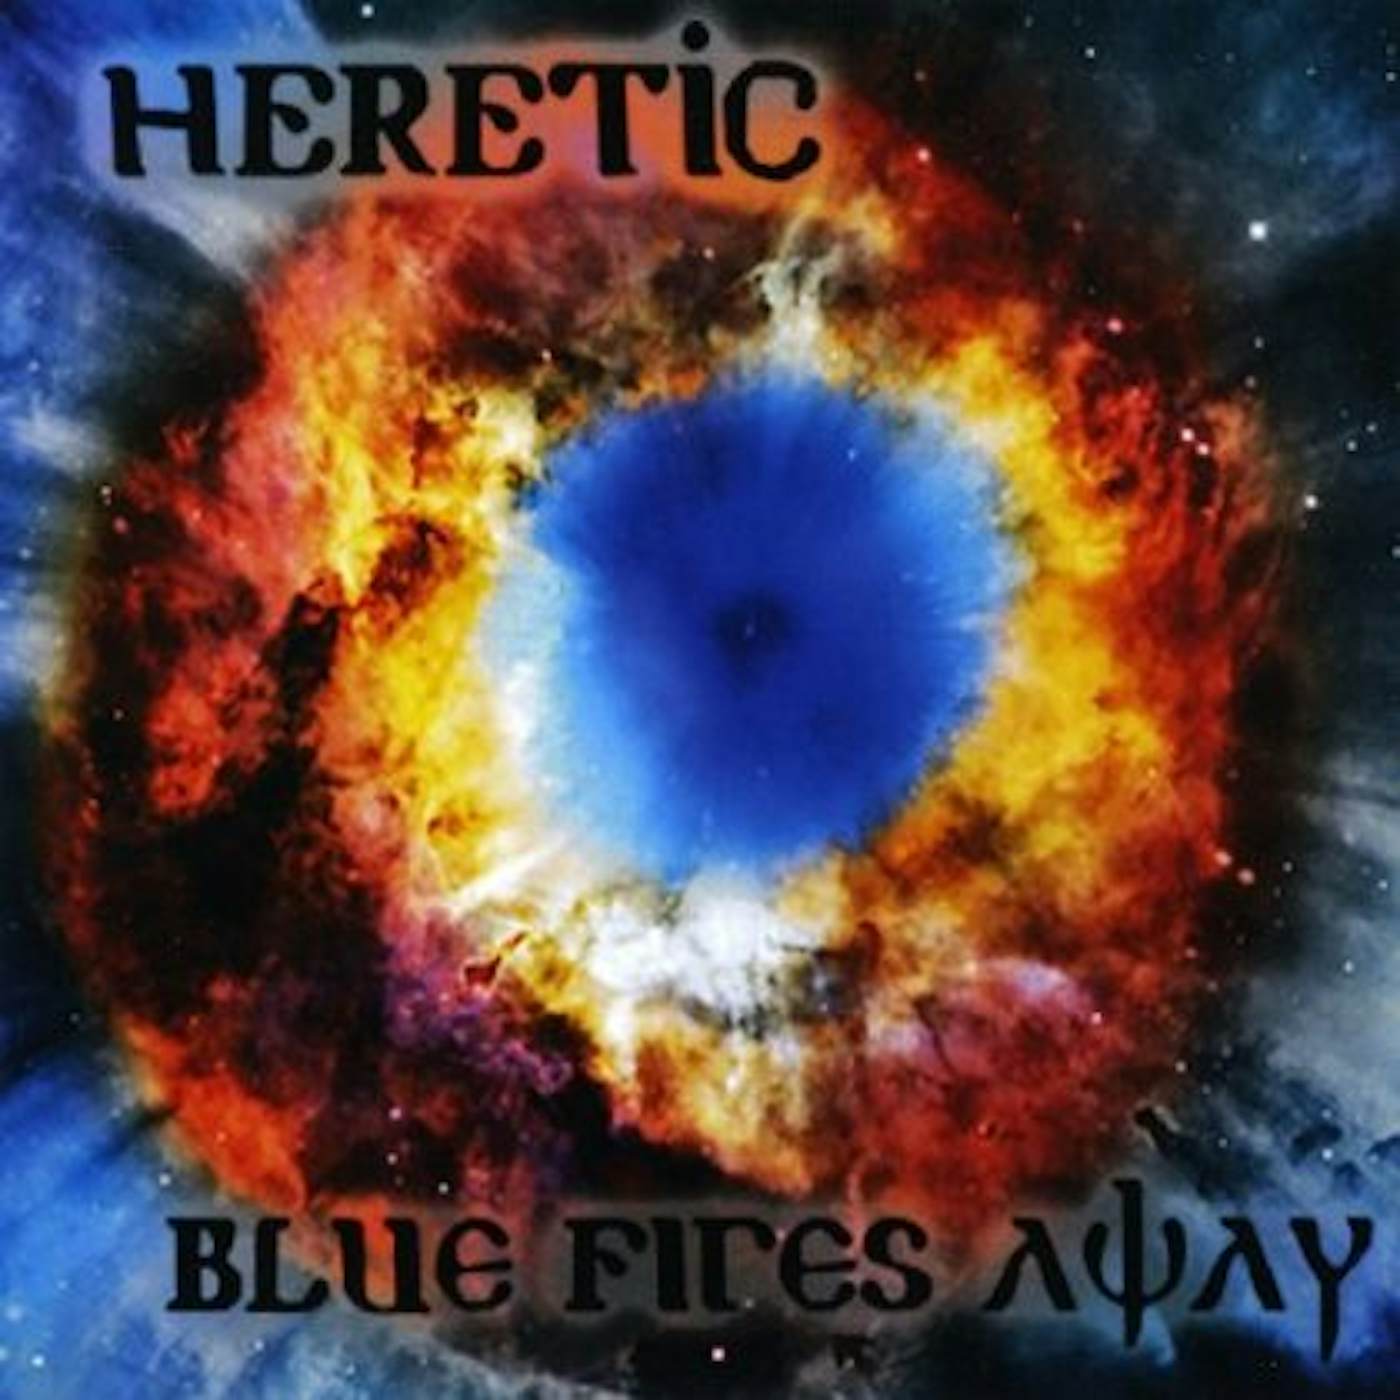 Heretic BLUE FIRES AWAY CD